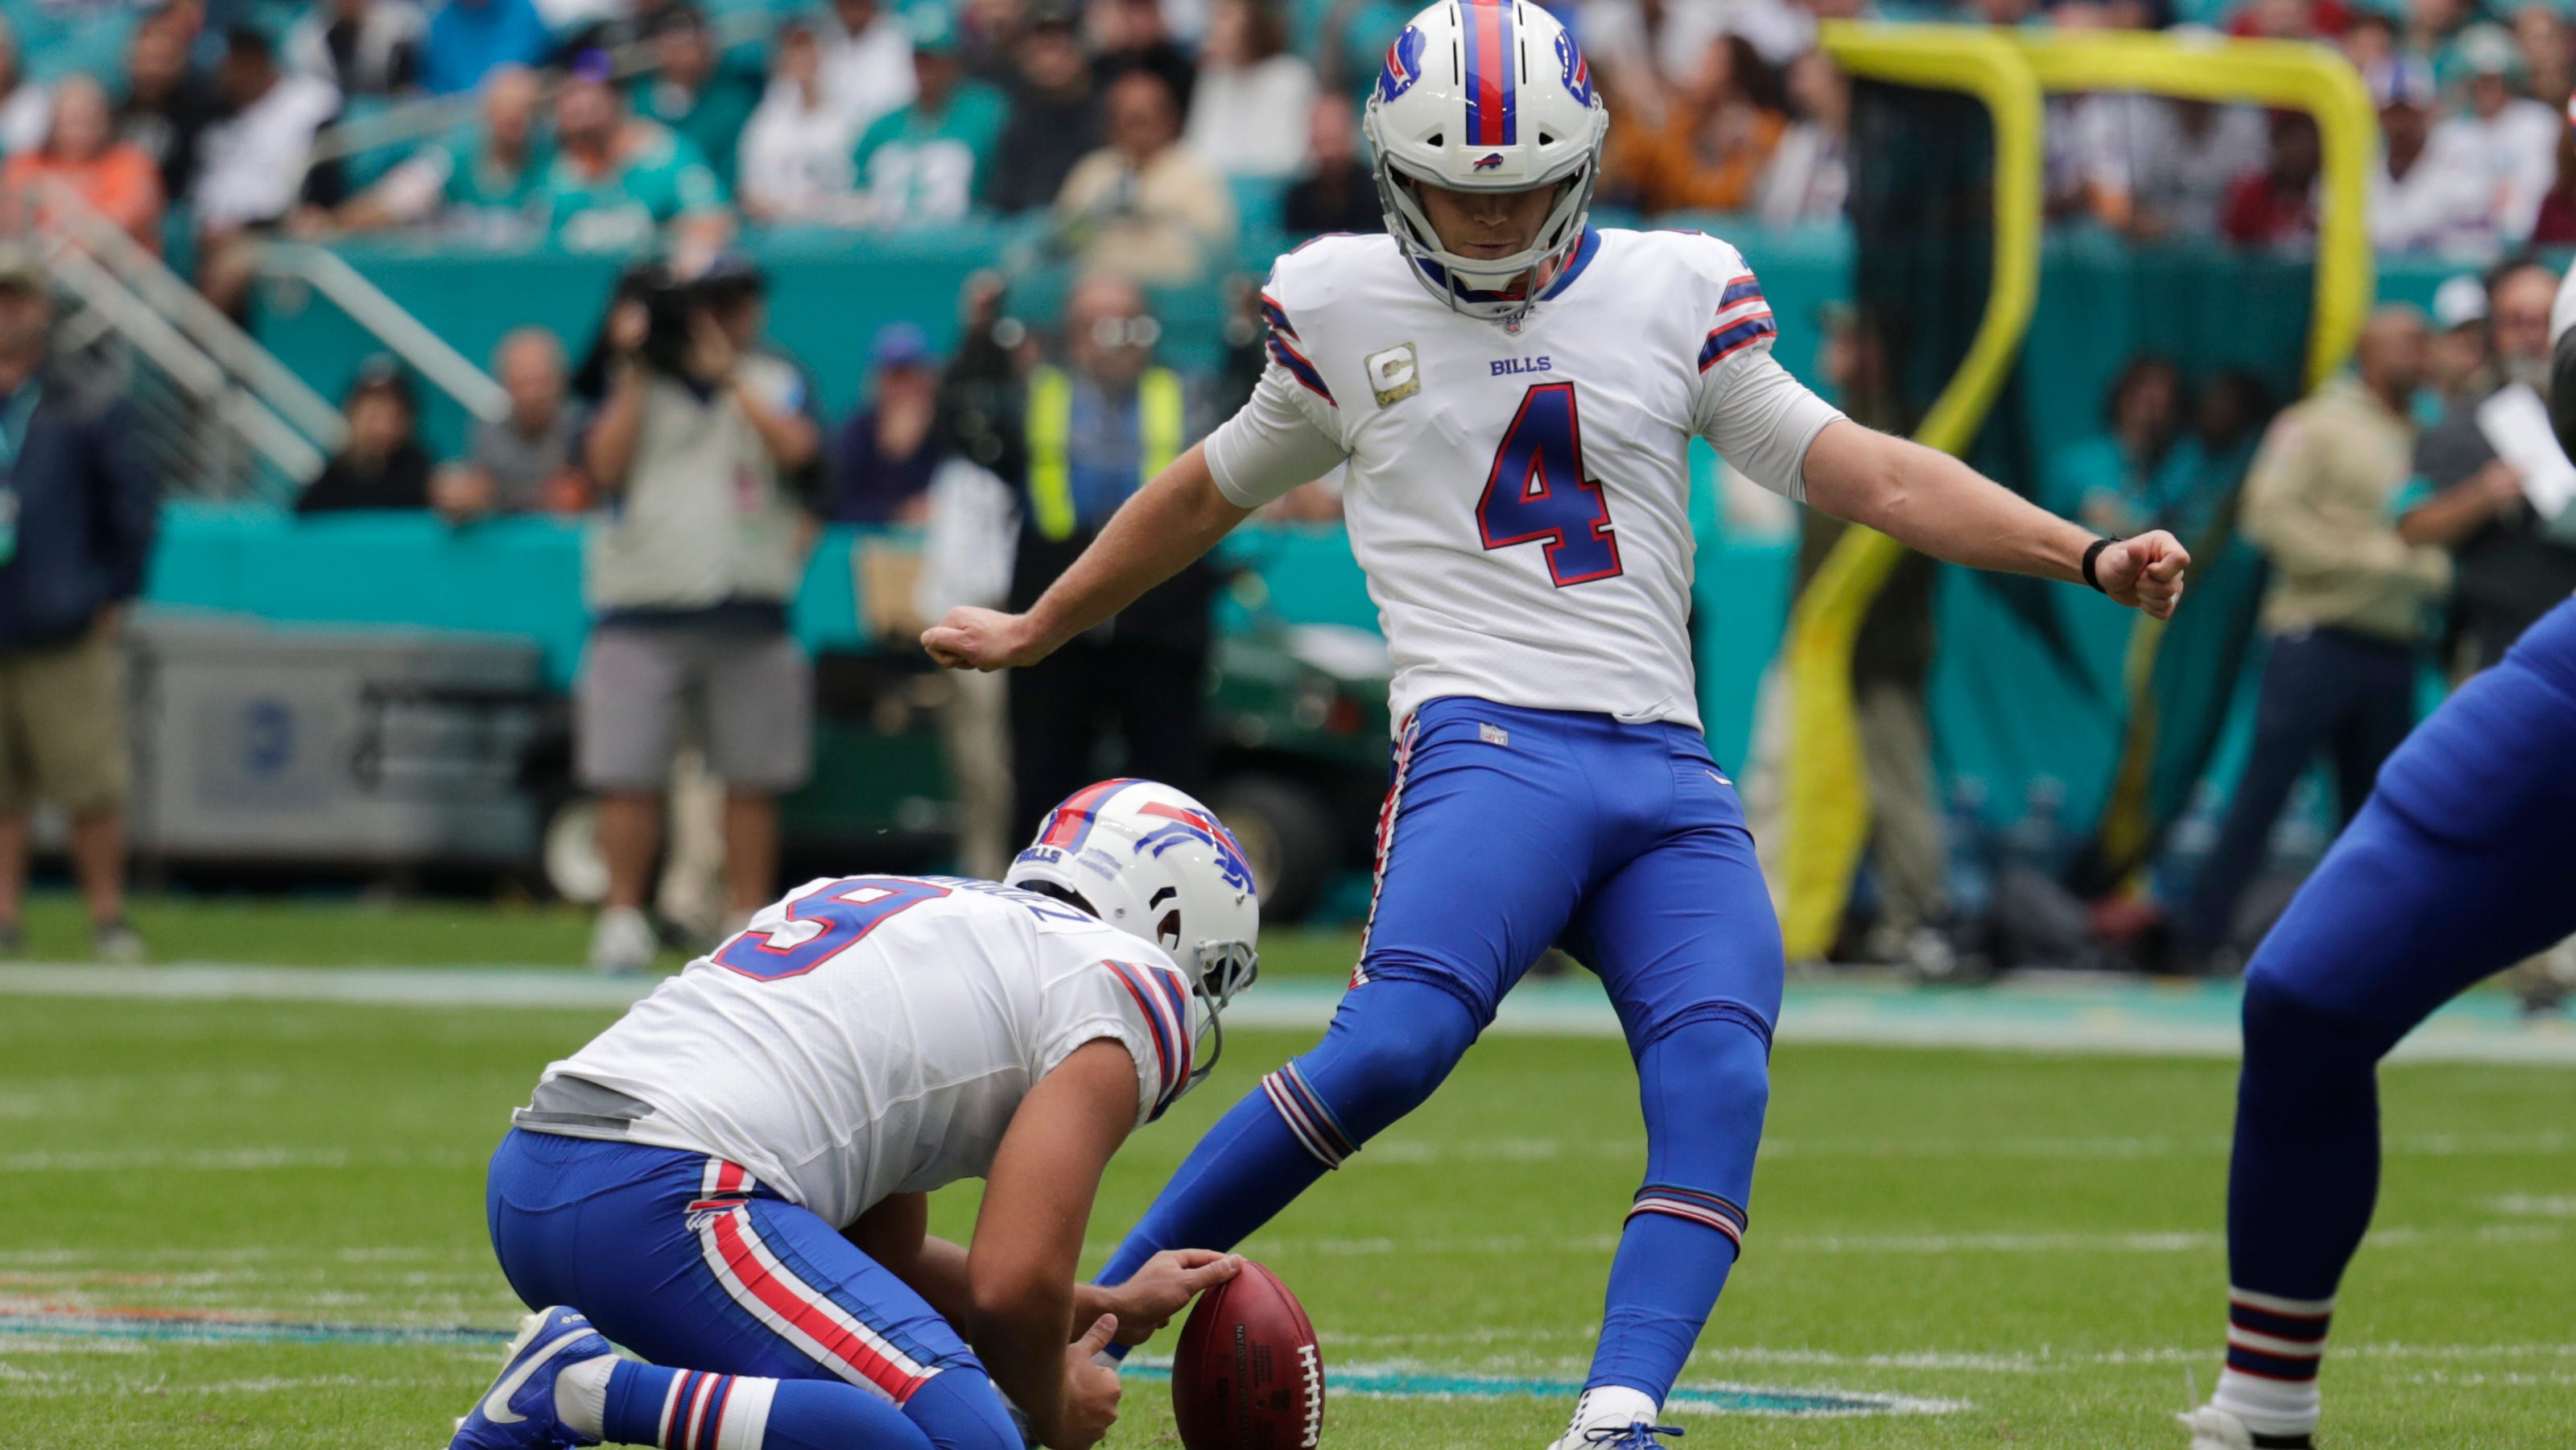 Kickers making field goals at NFL’s worst rate since 2003